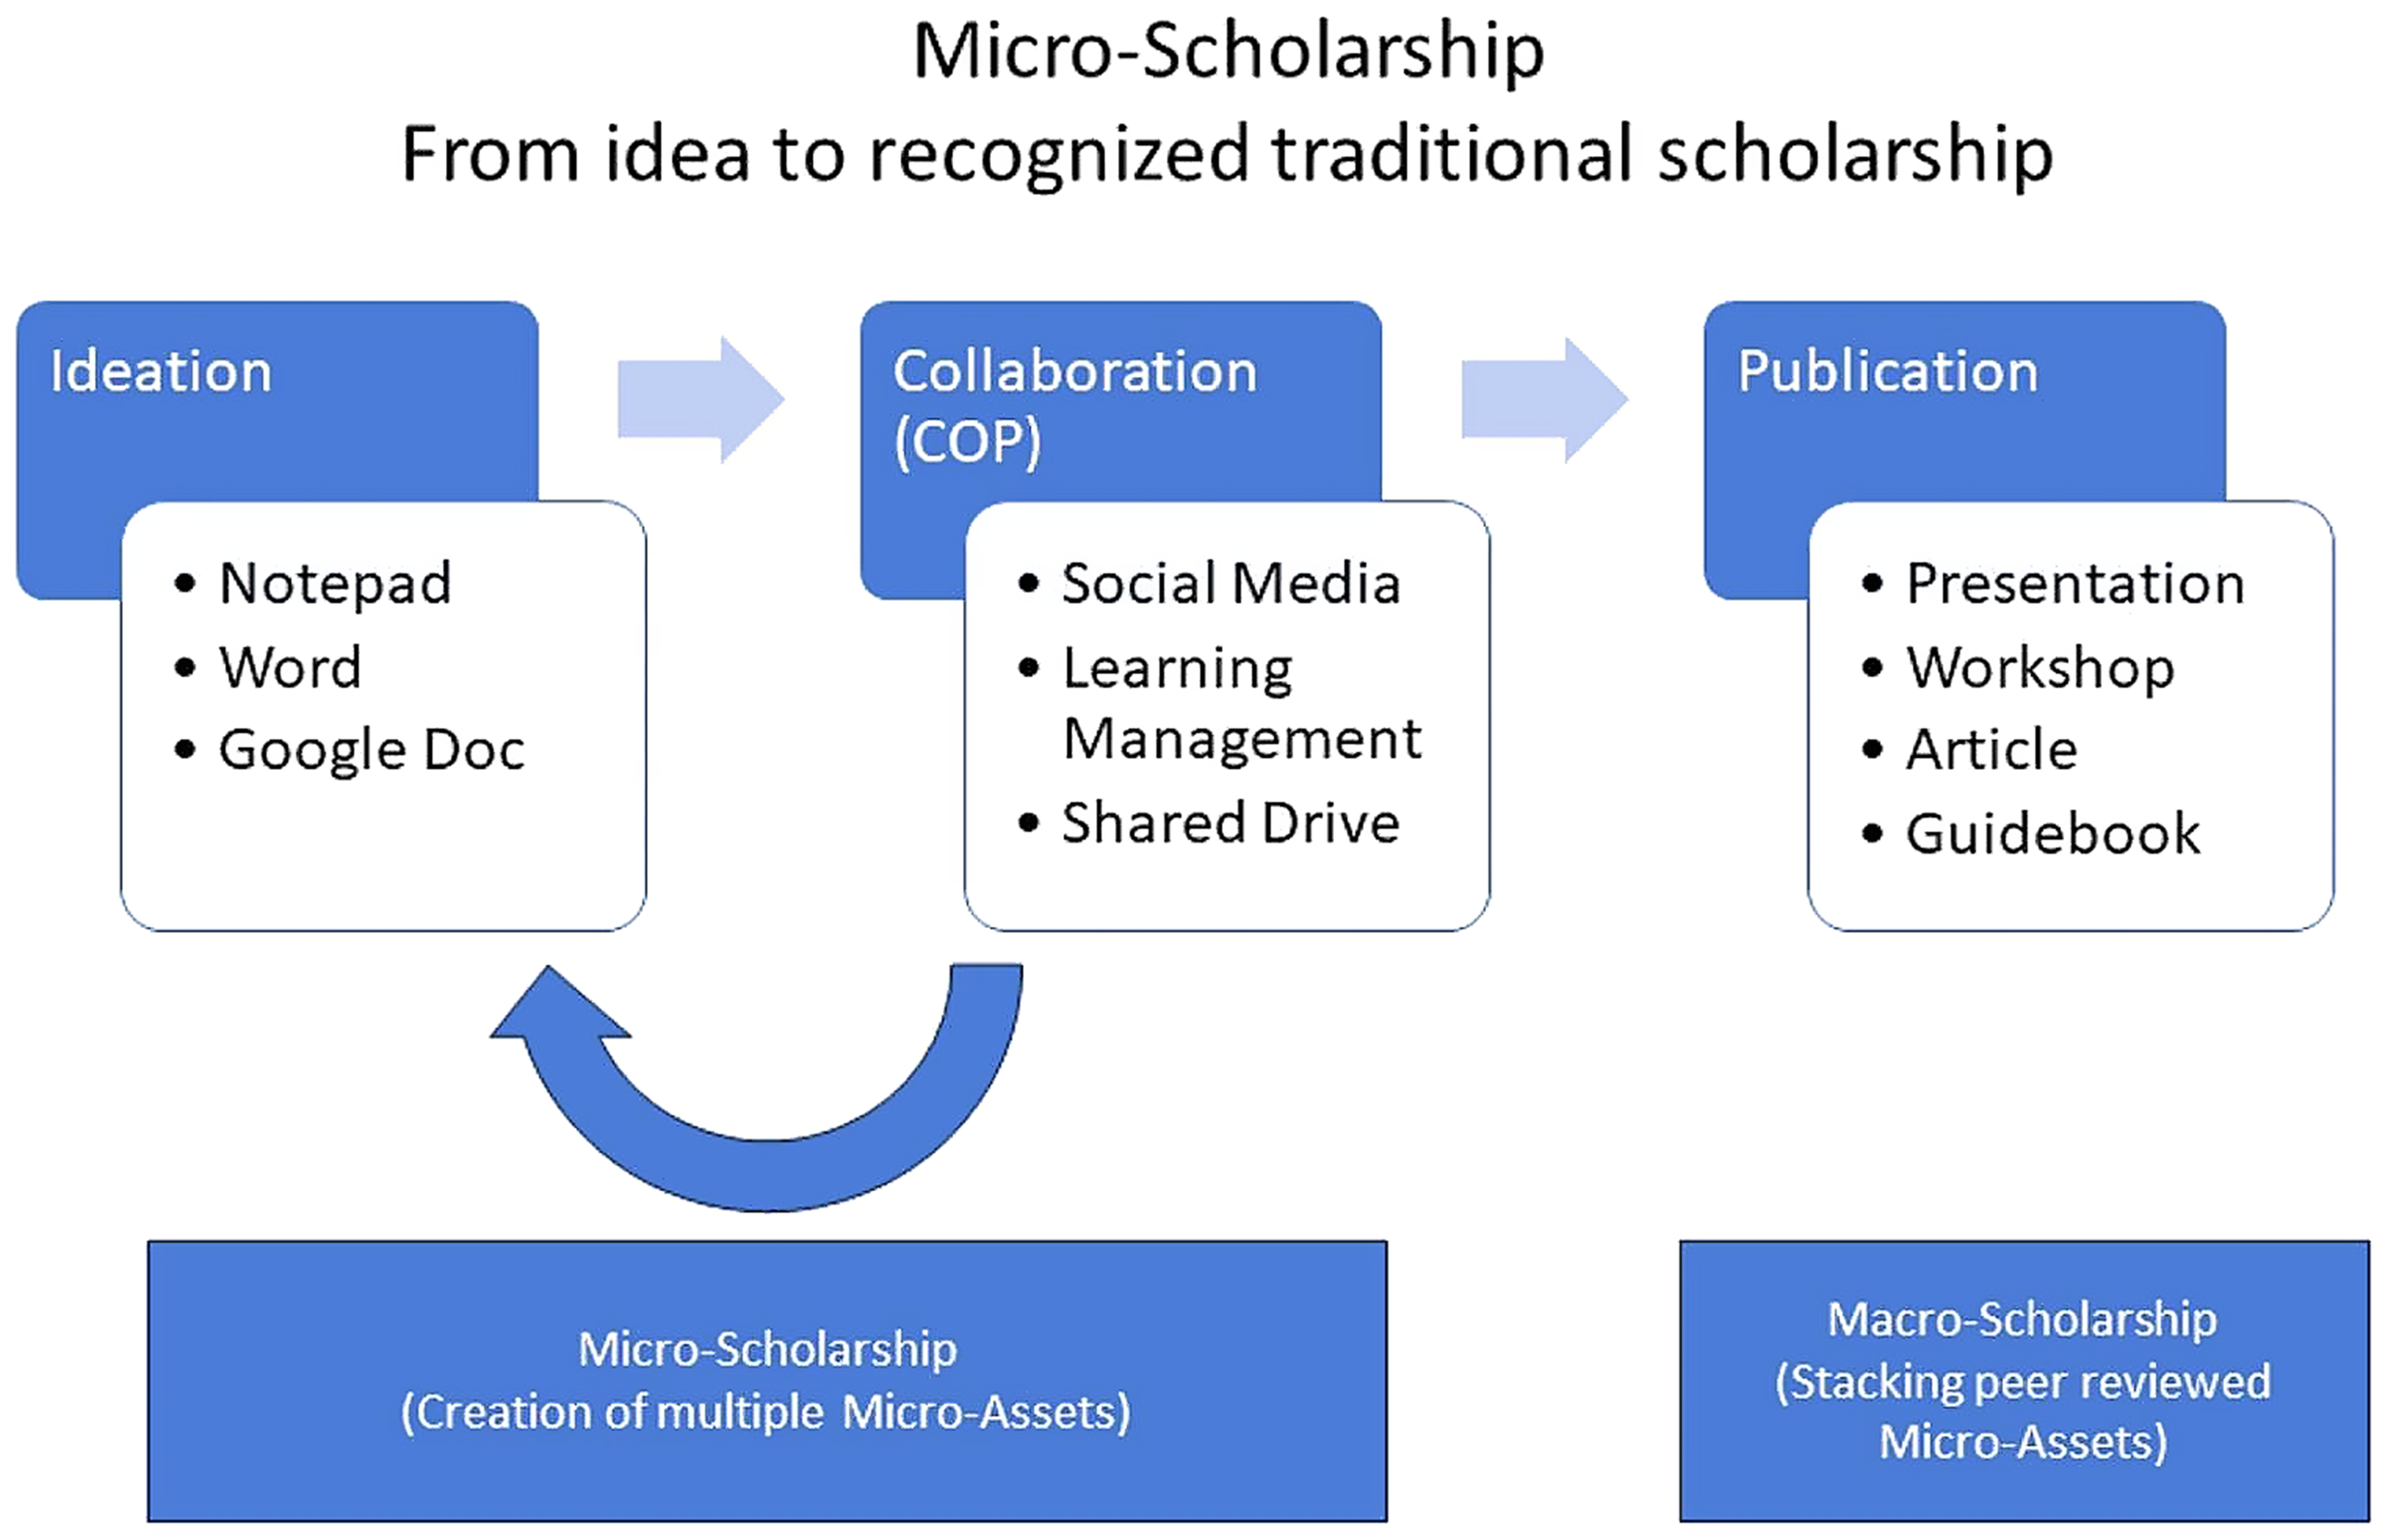 Micro-Scholarship: An Innovative Process Using Common Technology Tools